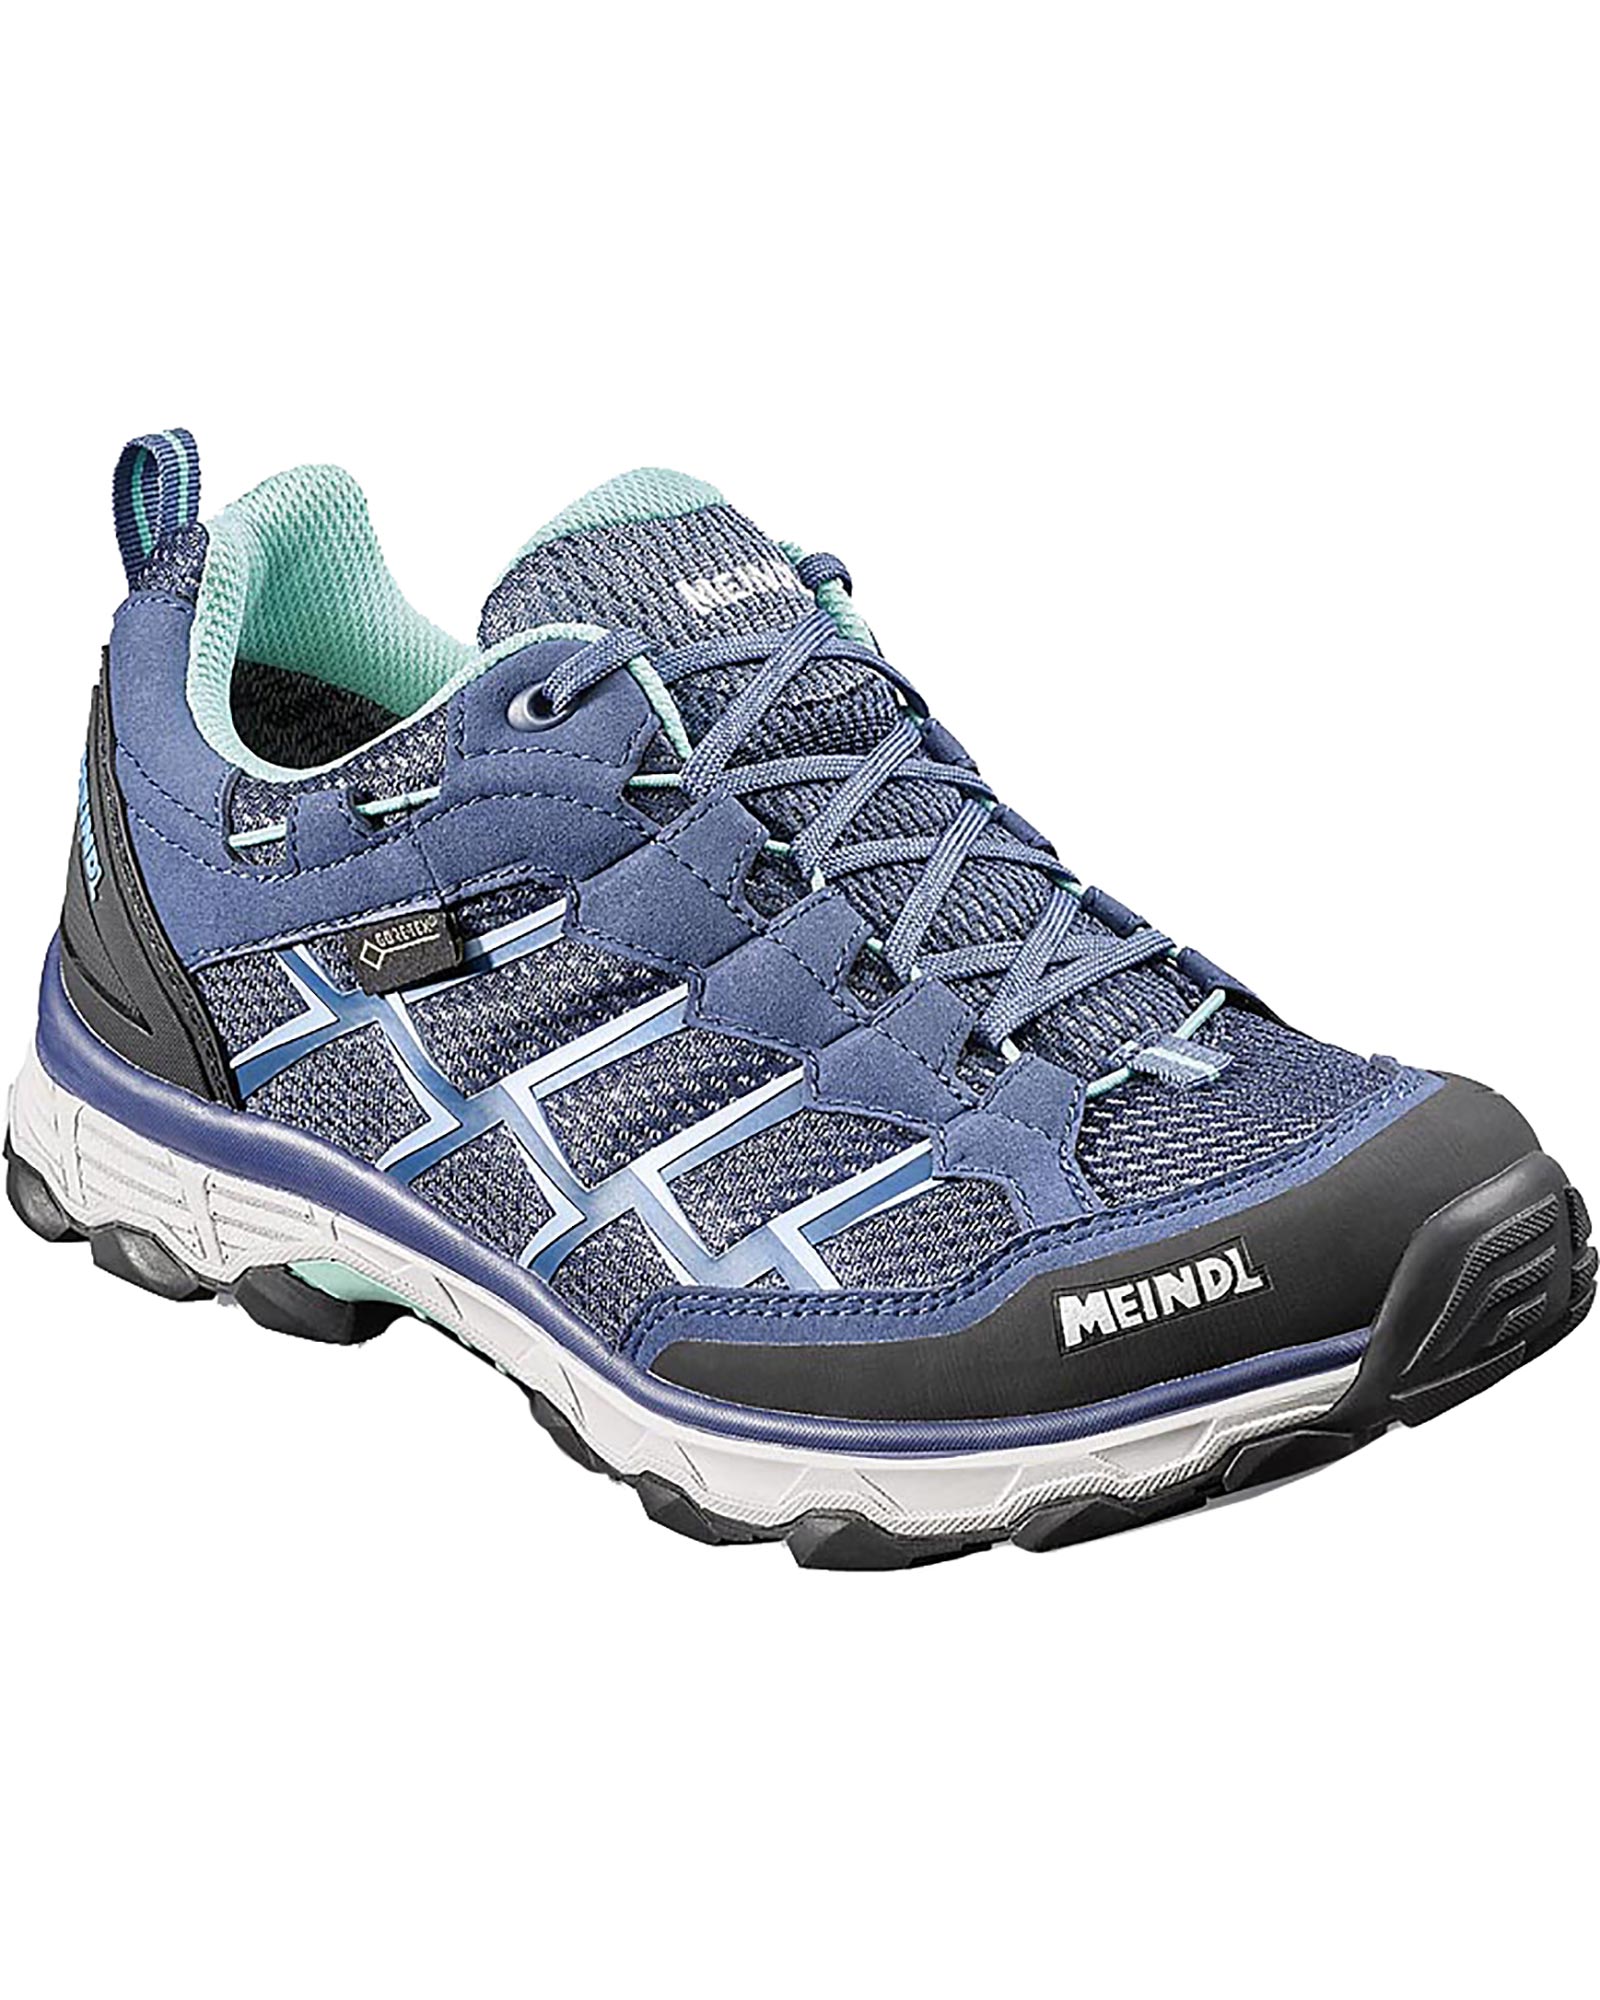 Meindl Activo Gore-tex Womens Shoes